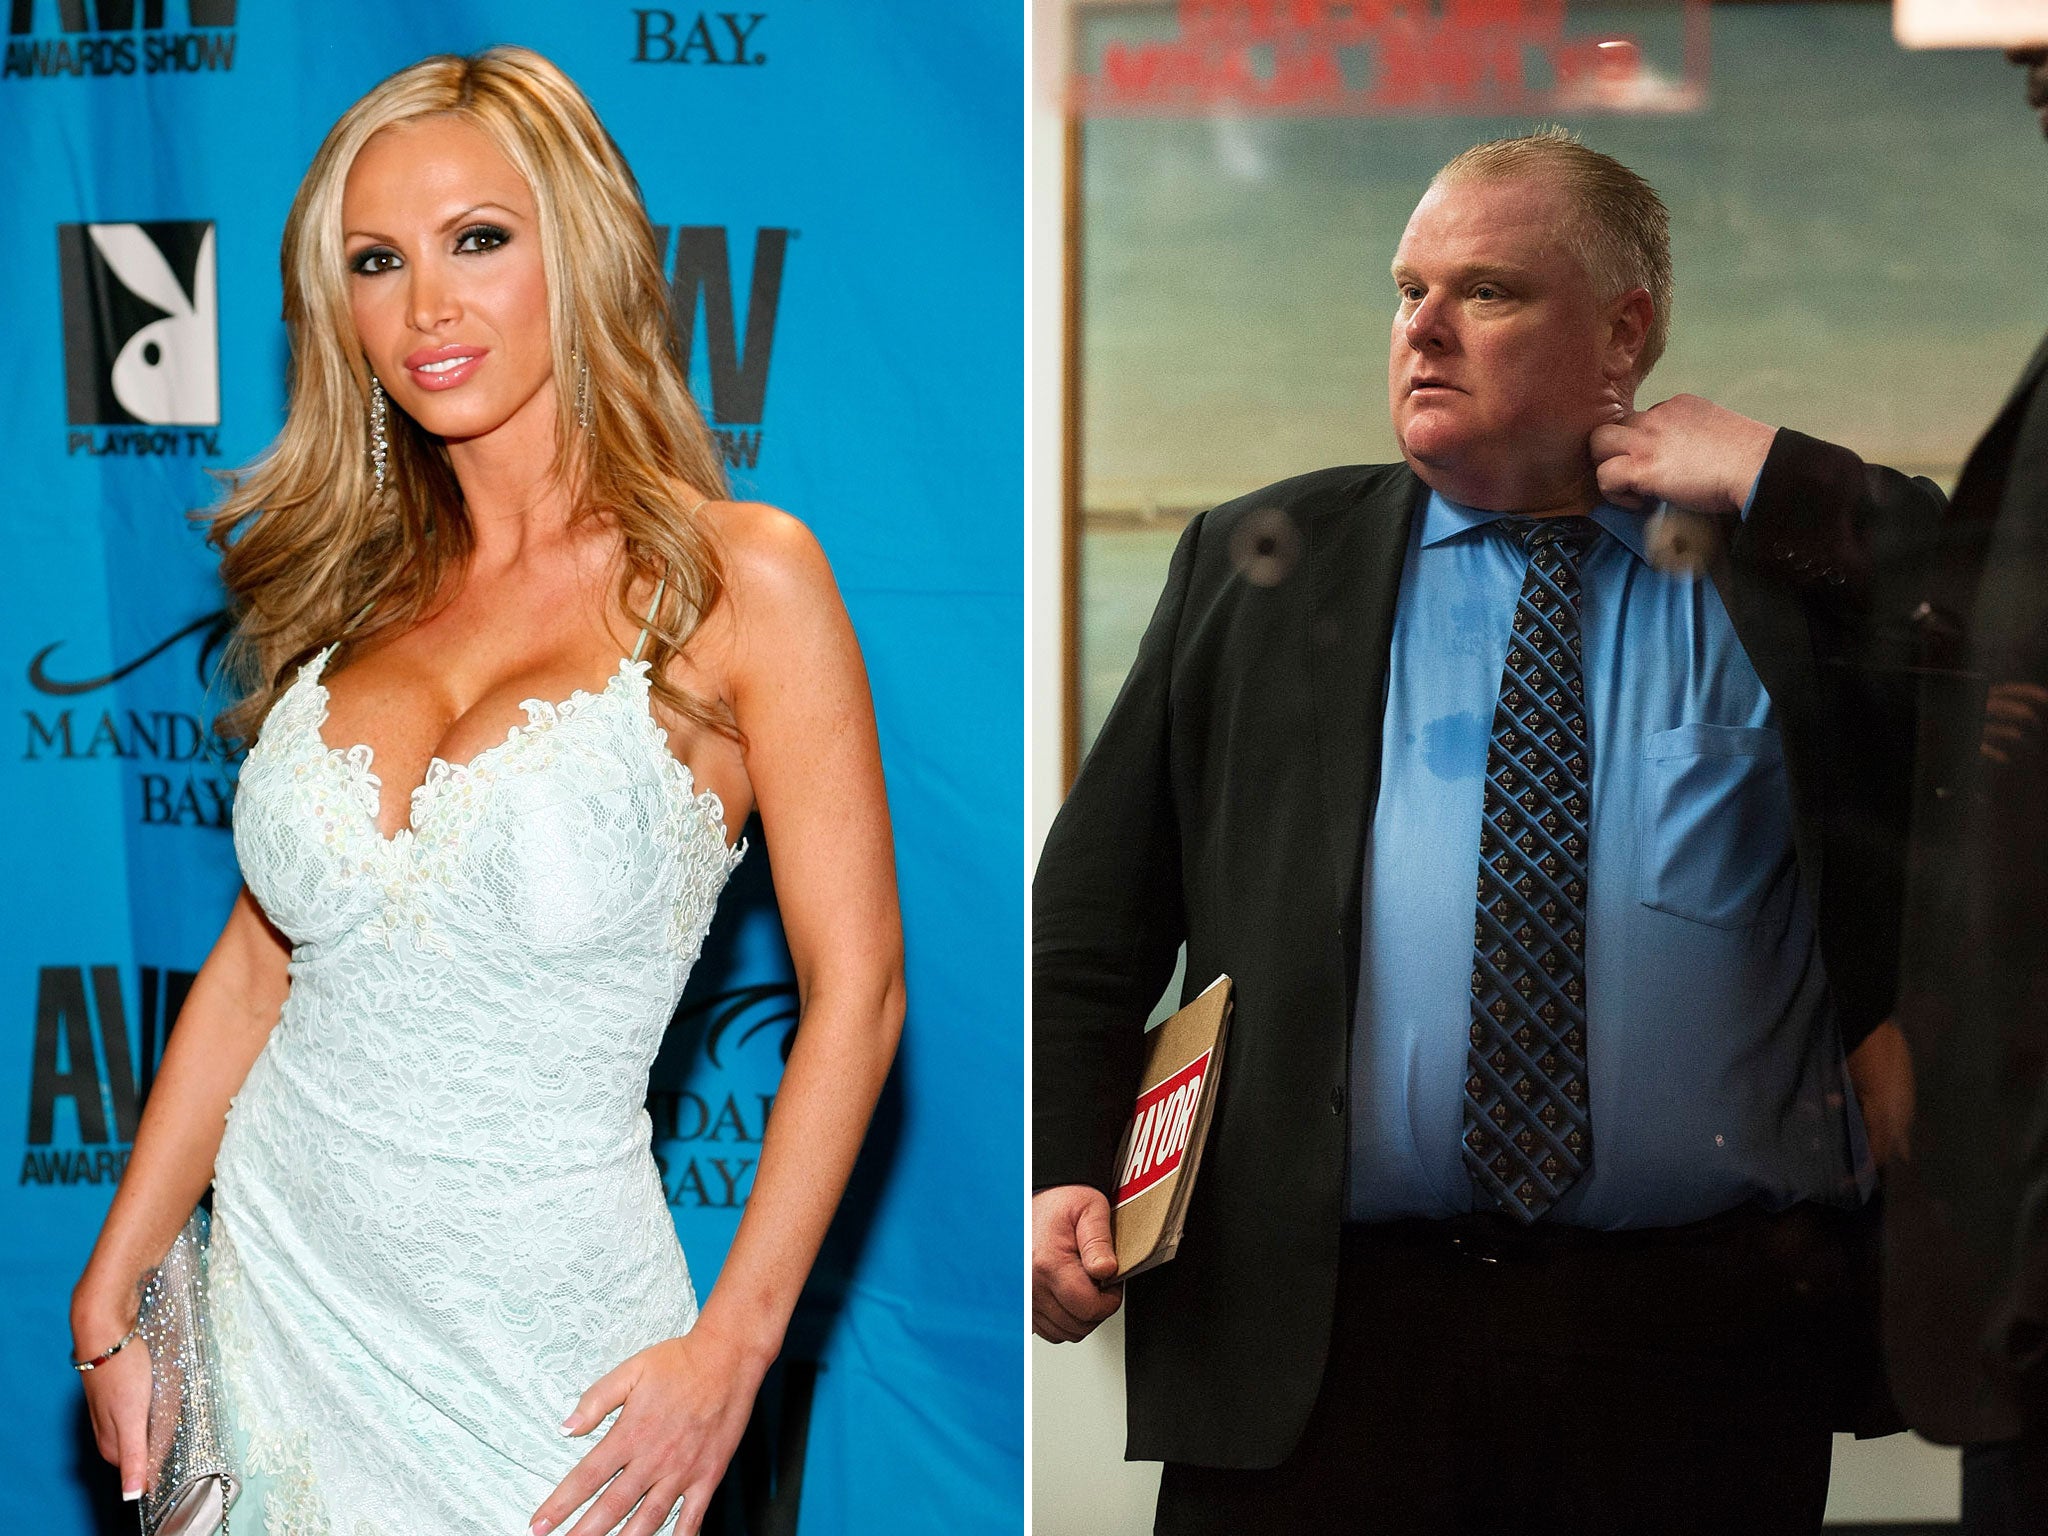 Nikki Benz - Porn star Nikki Benz to run against Rob Ford in Toronto mayoral elections |  The Independent | The Independent